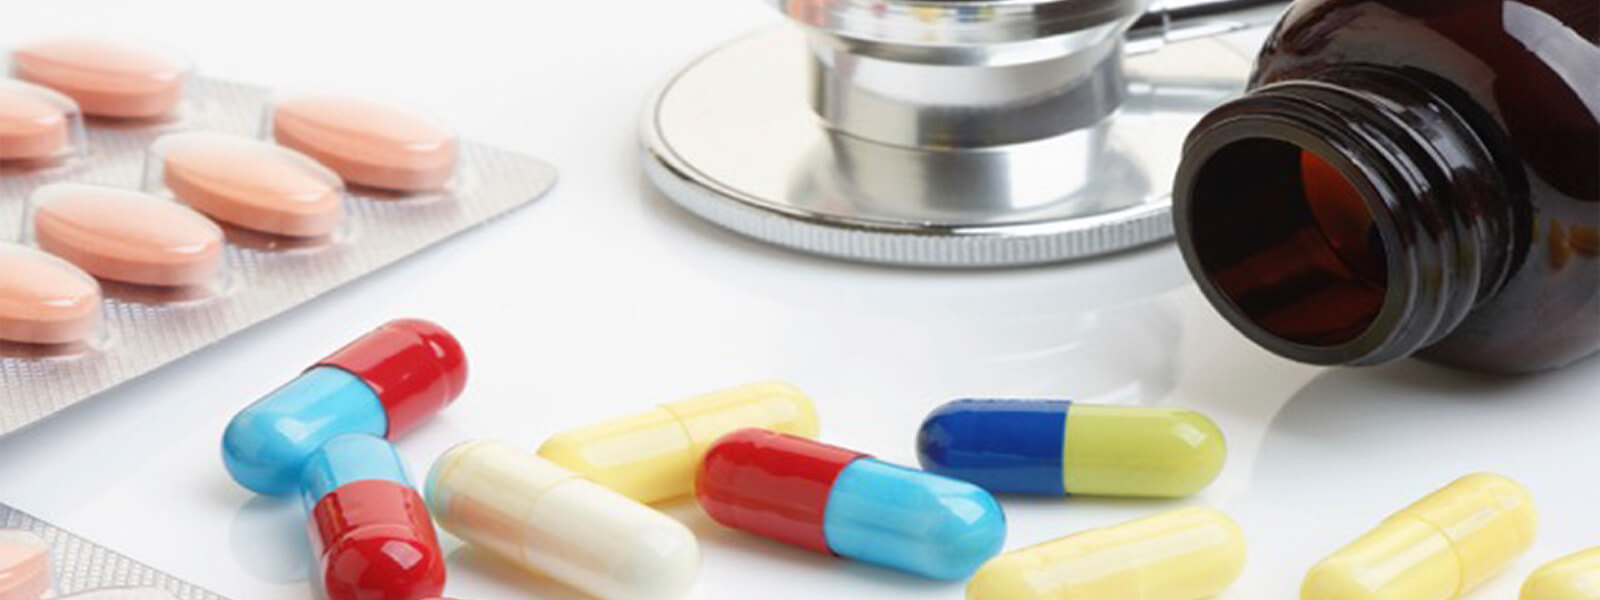 View our Recorded Webinar on Pharmaceutical Compliance